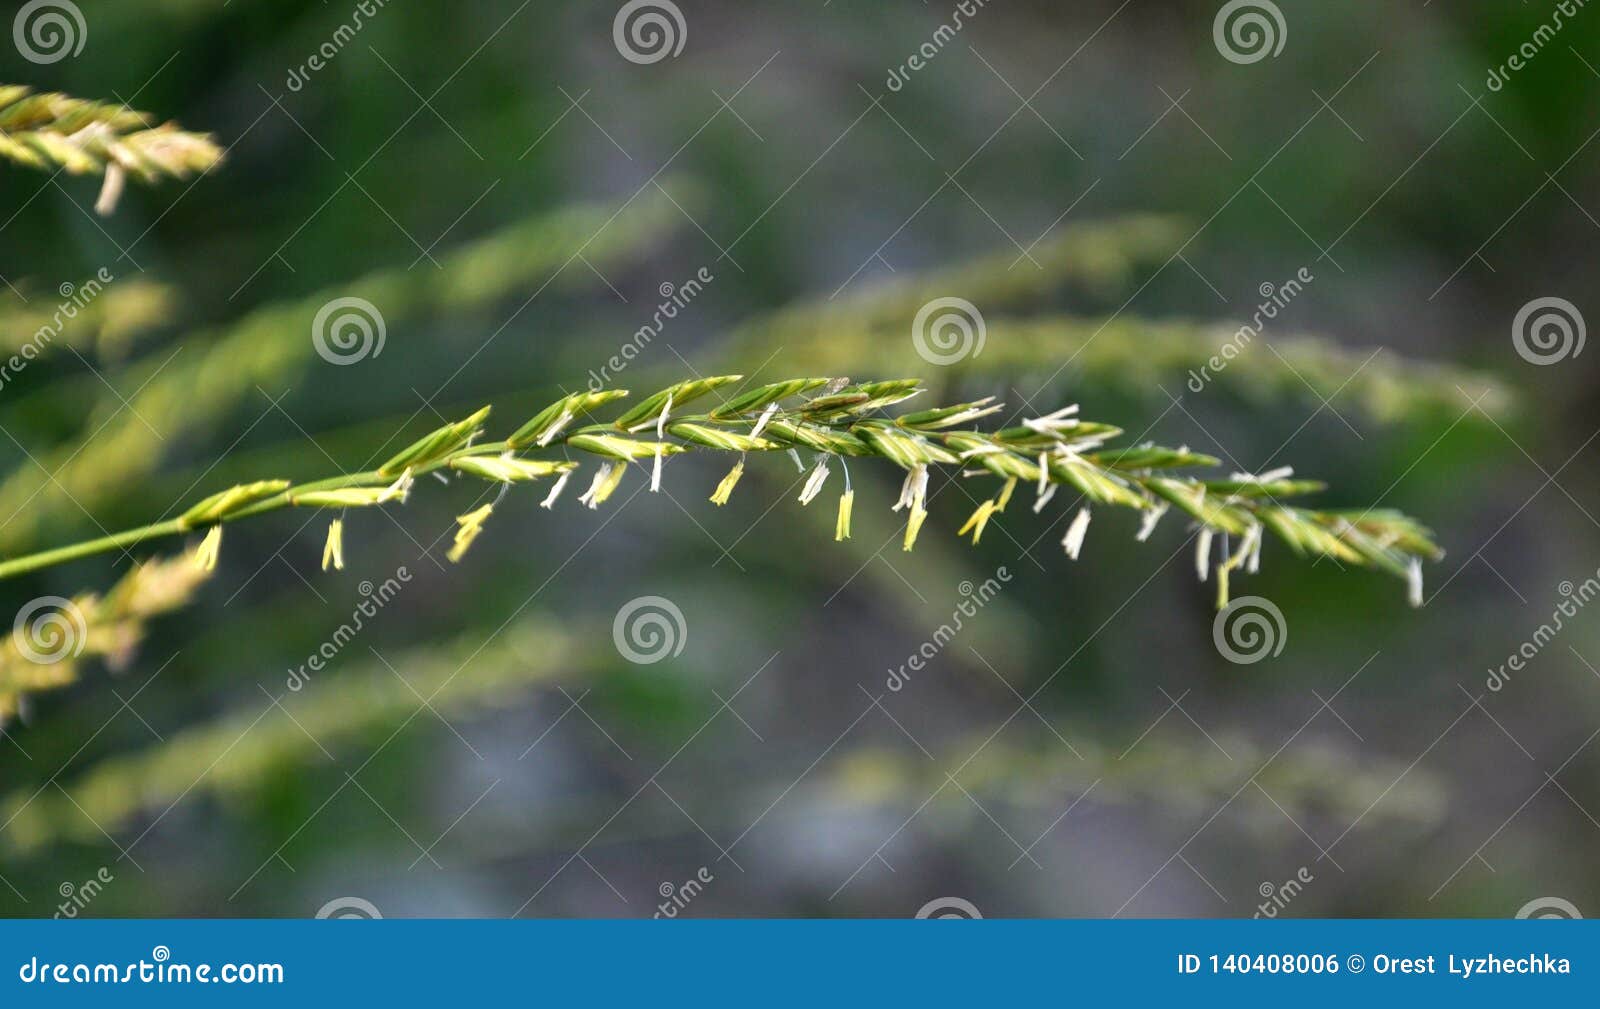 in the nature blooming ryegrass lolium perenne